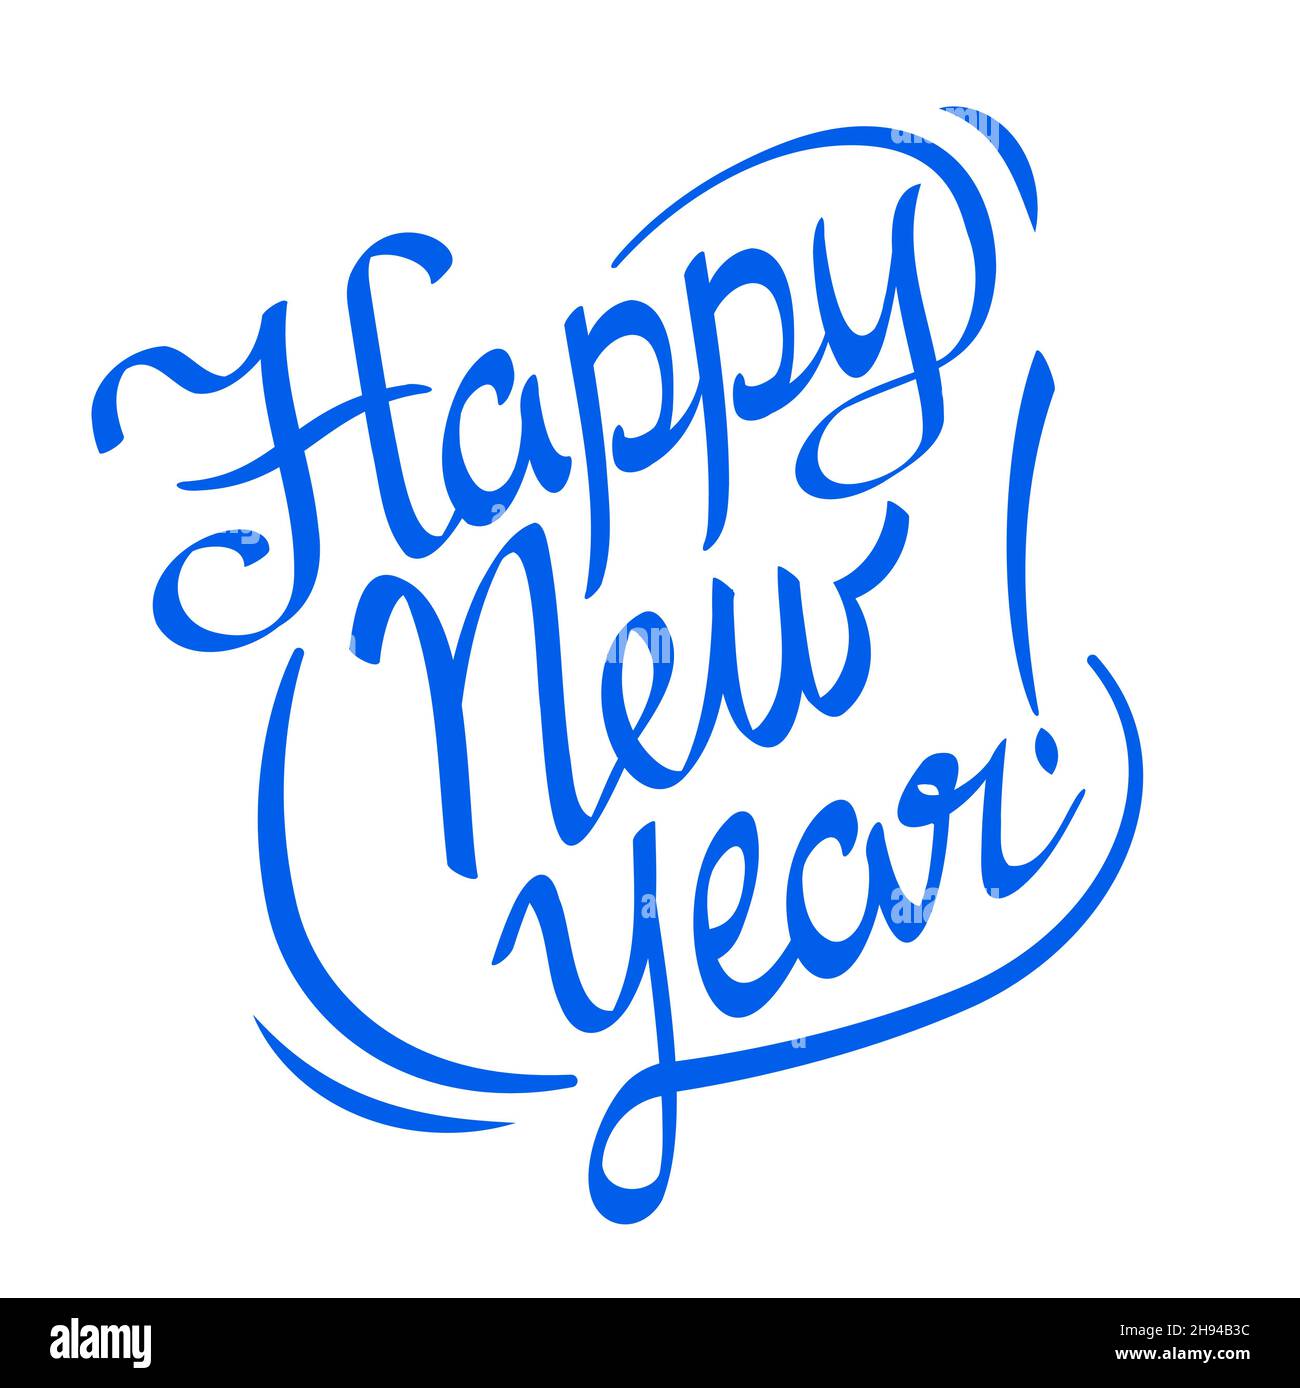 Happy New Year lettering Illustration and calligraphy text Stock Vector